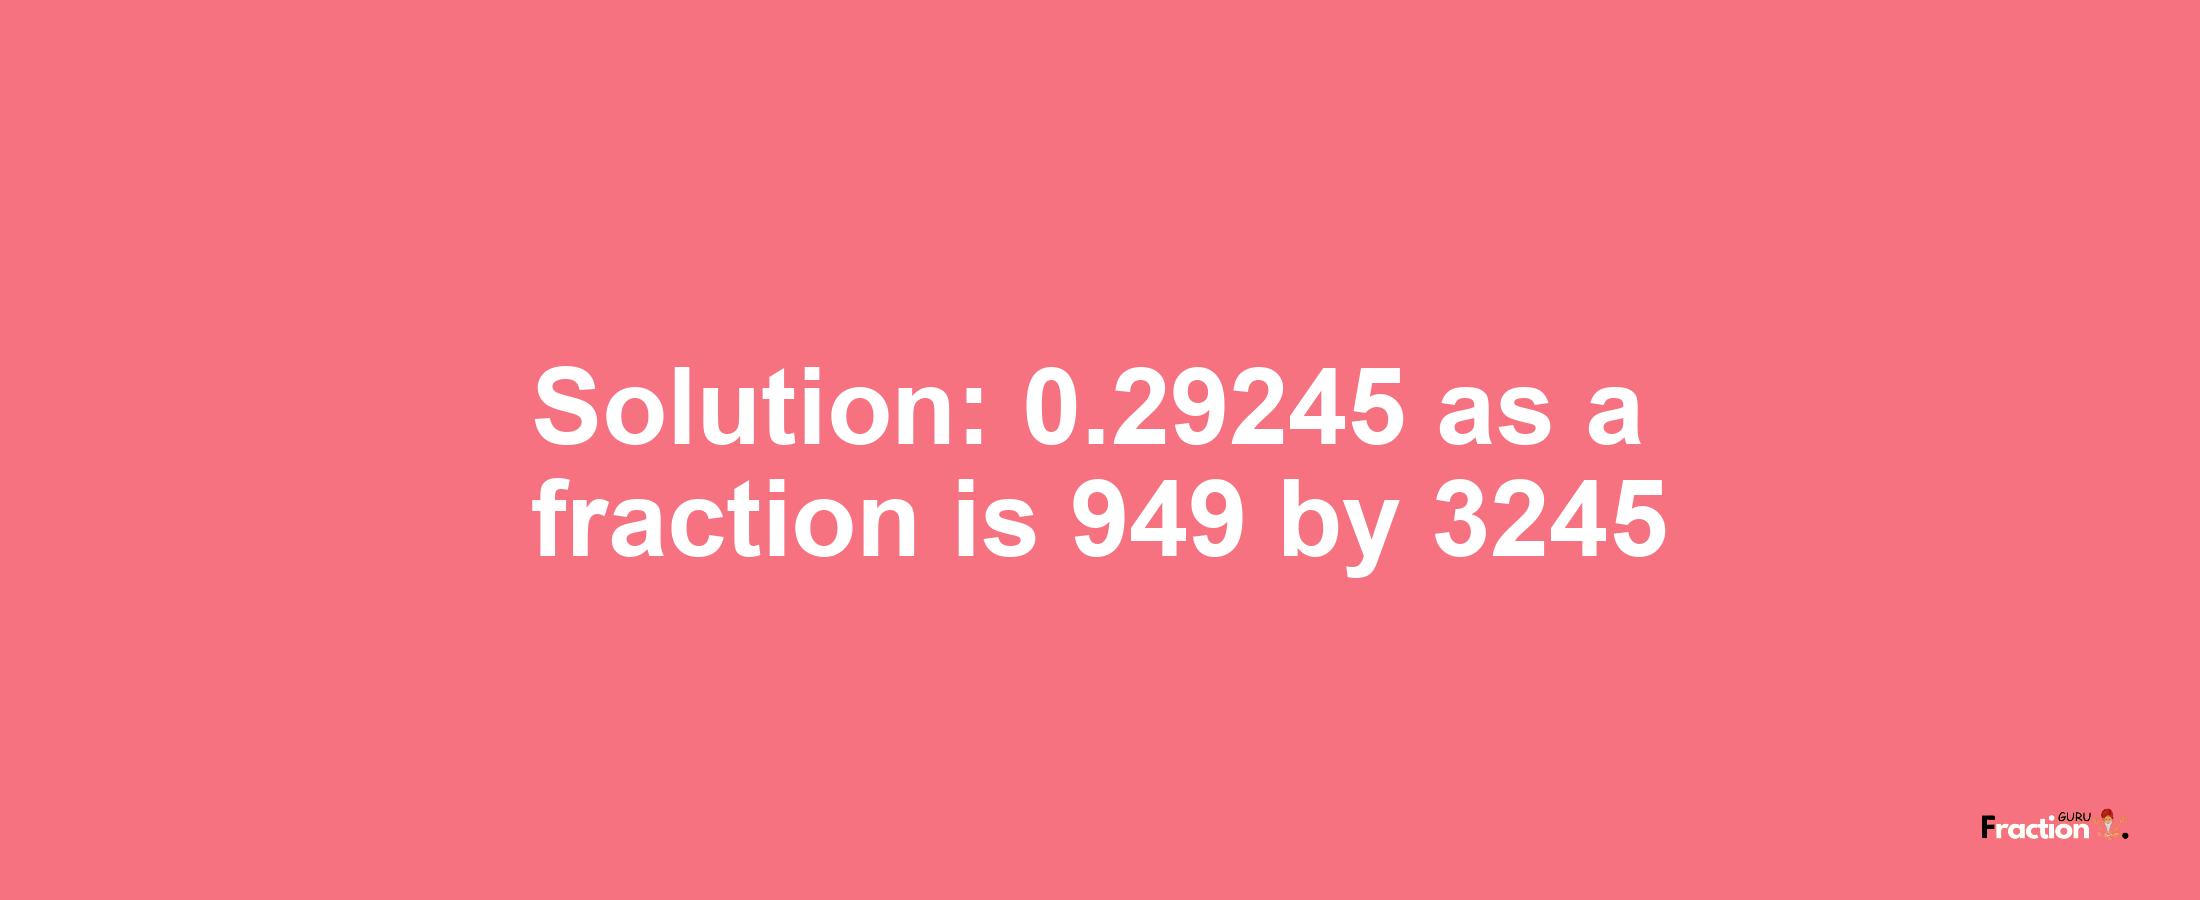 Solution:0.29245 as a fraction is 949/3245